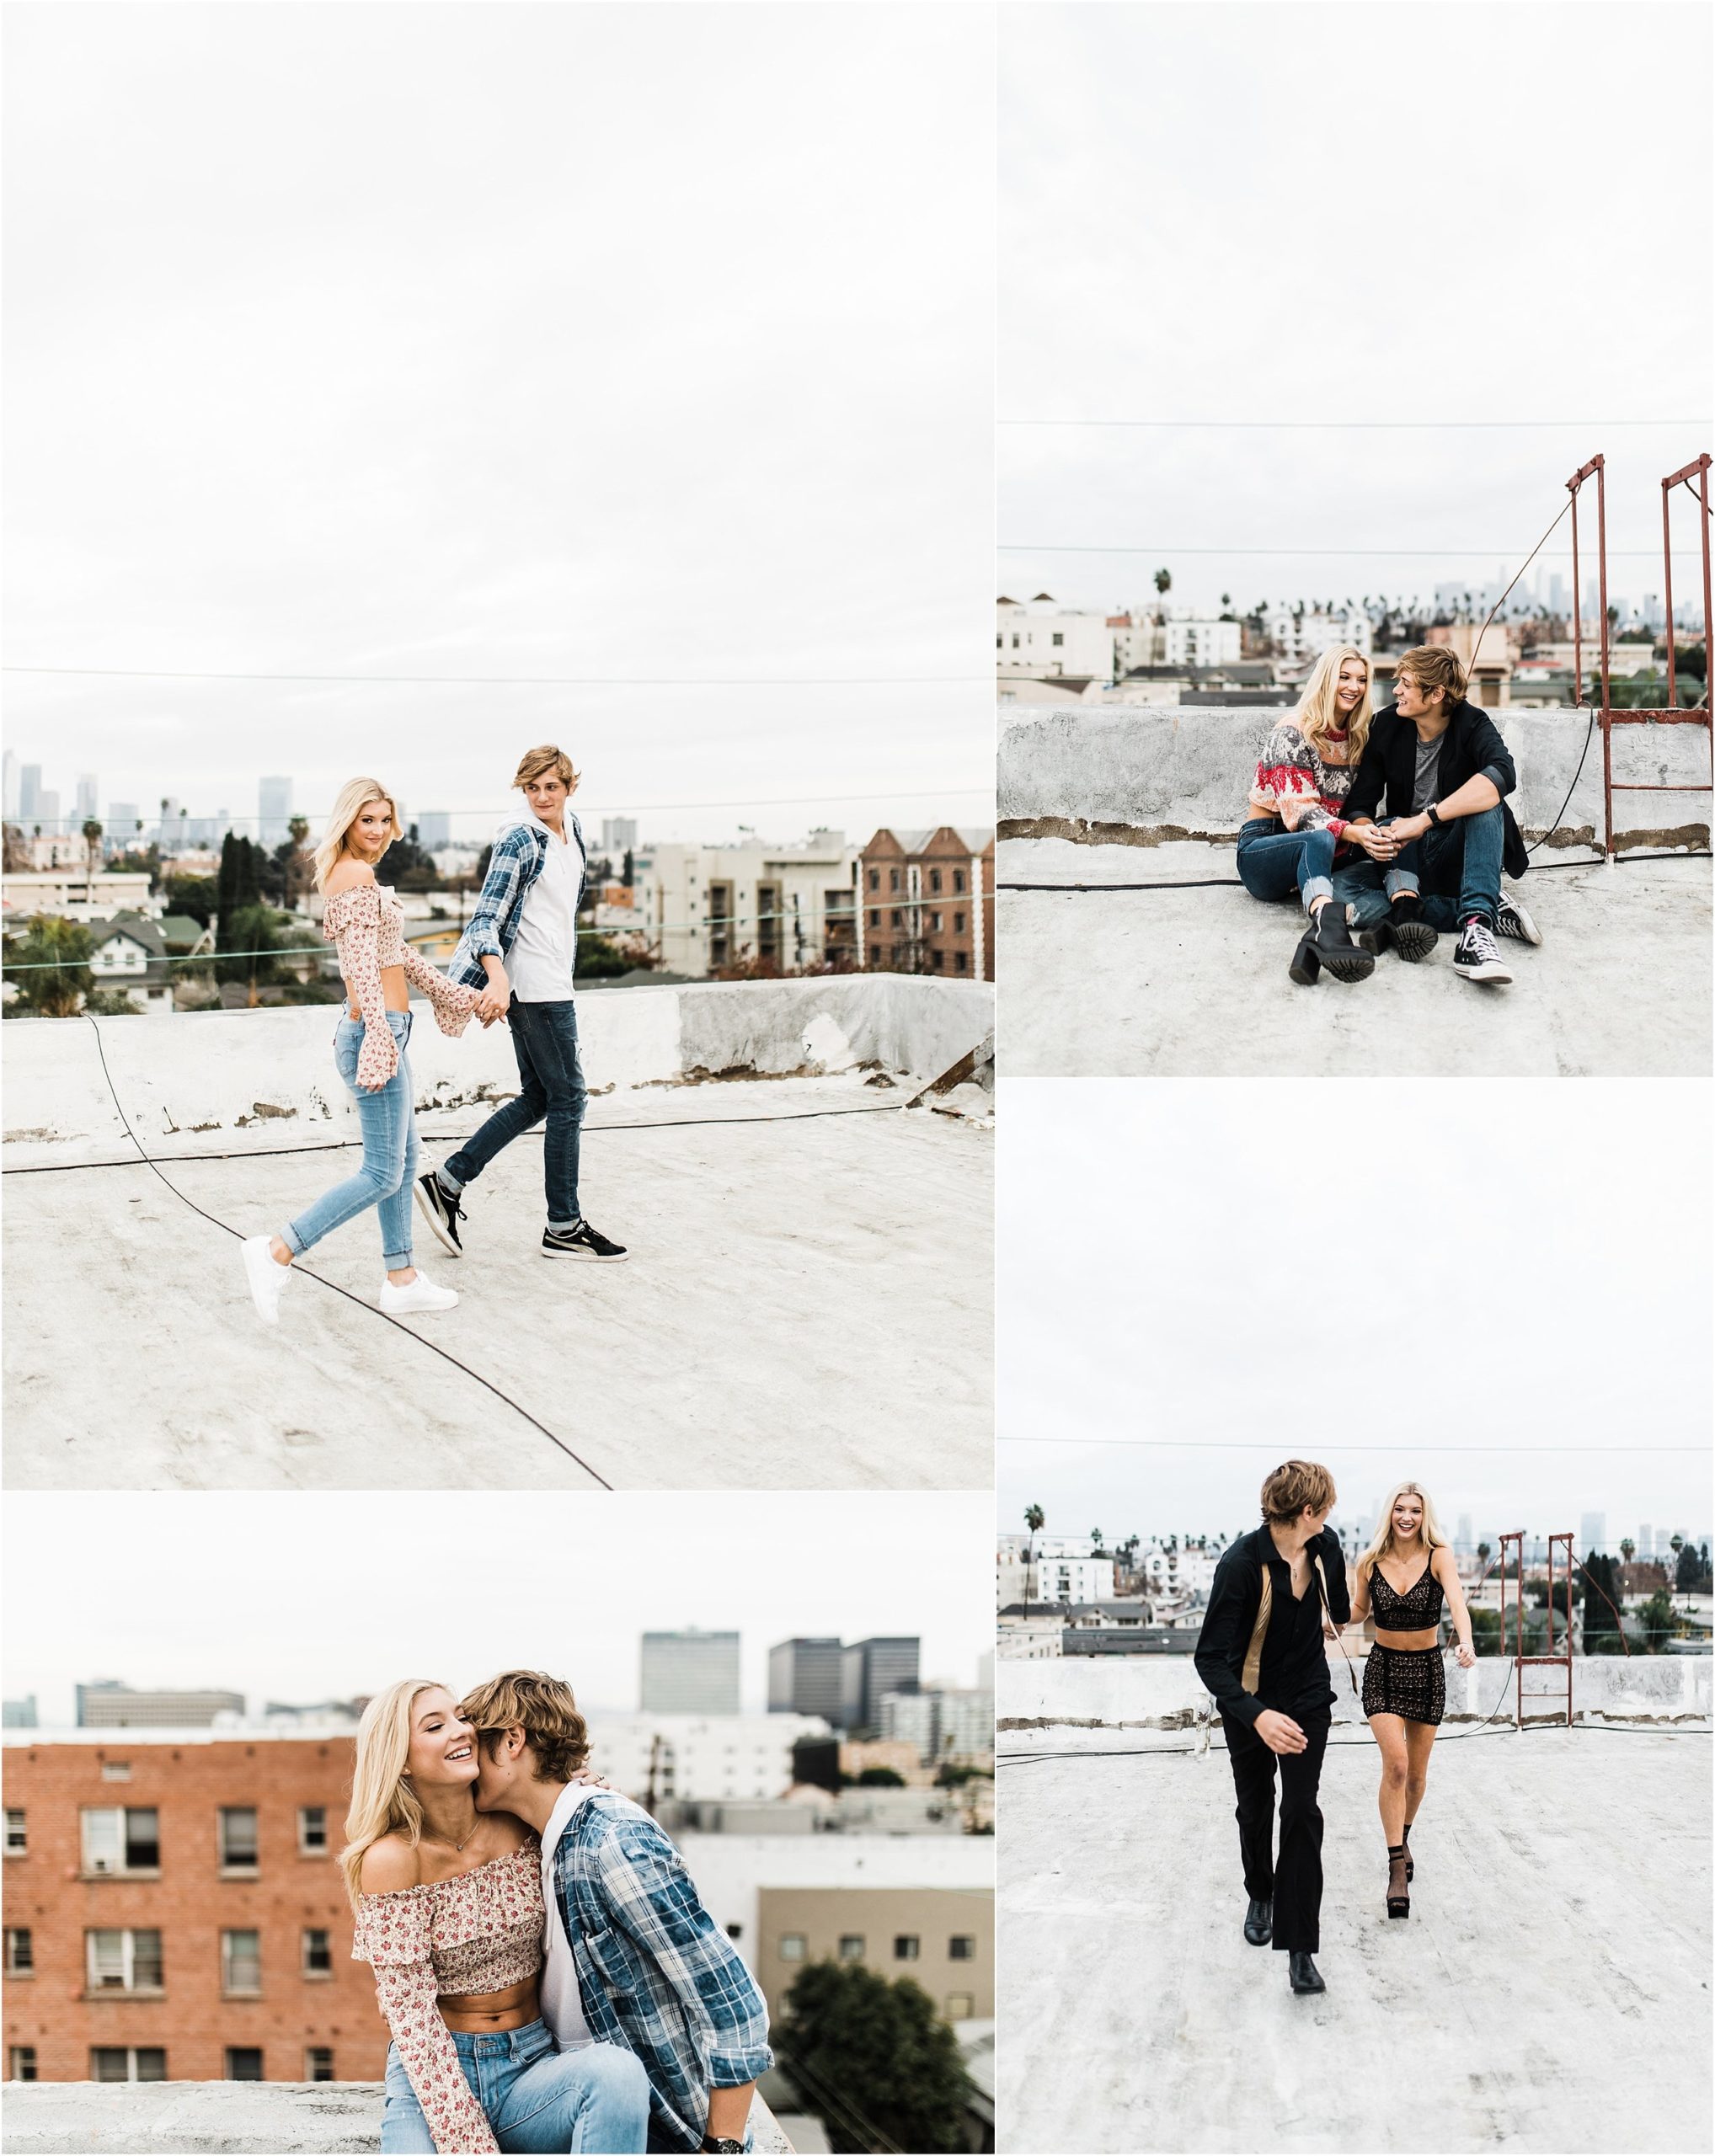 southern california engagement photos locations; couple hanging out on rooftop in los angeles taking engagement photos